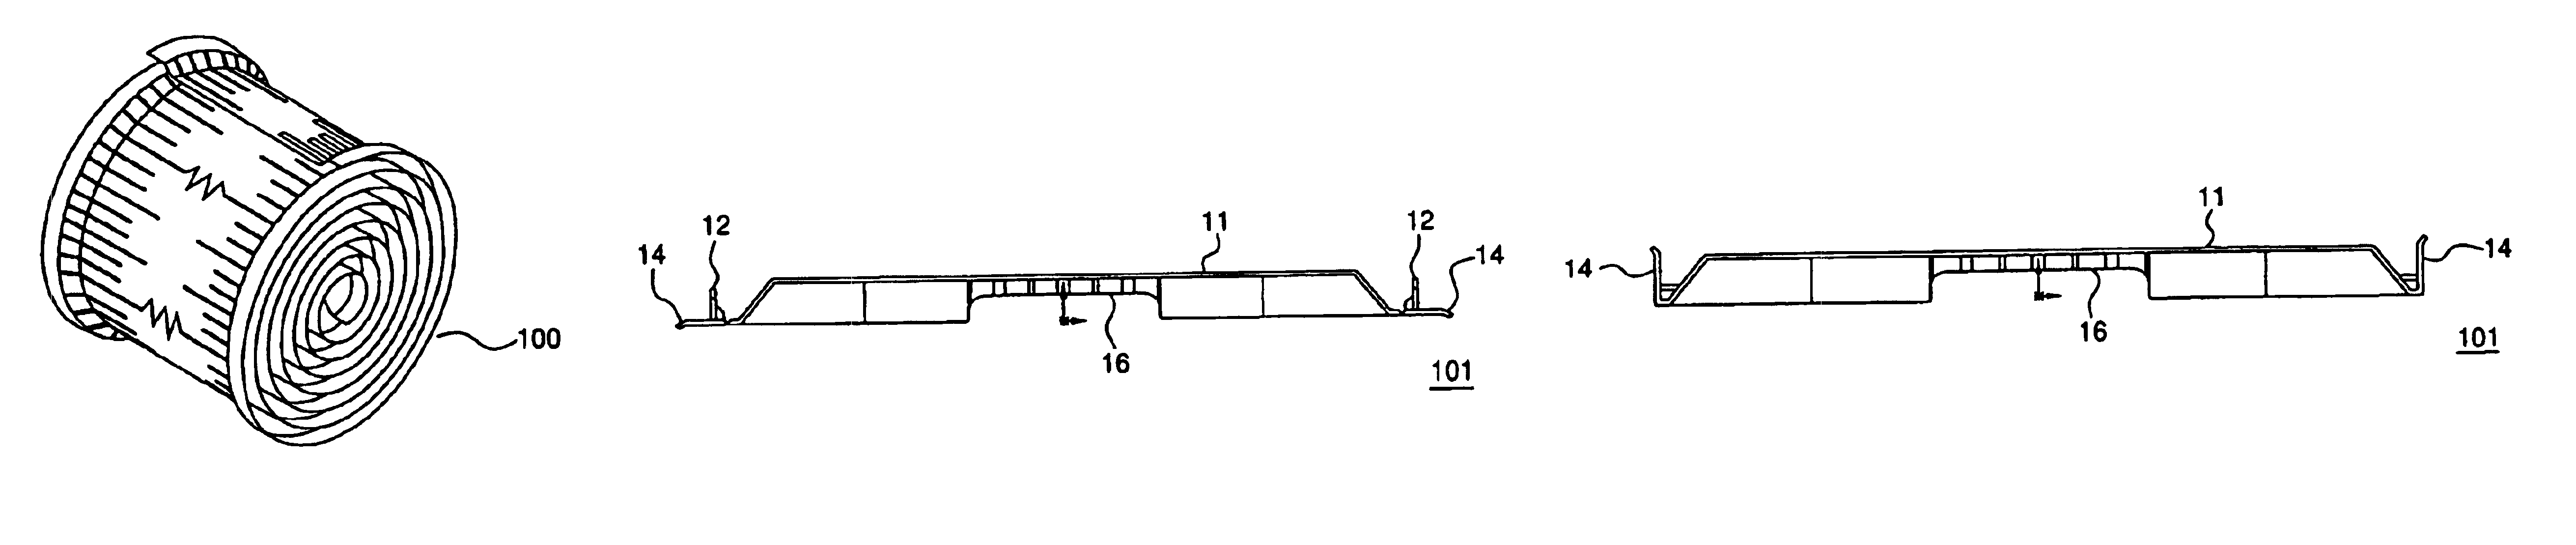 Externally baffled ridge vent and methods of manufacture and use